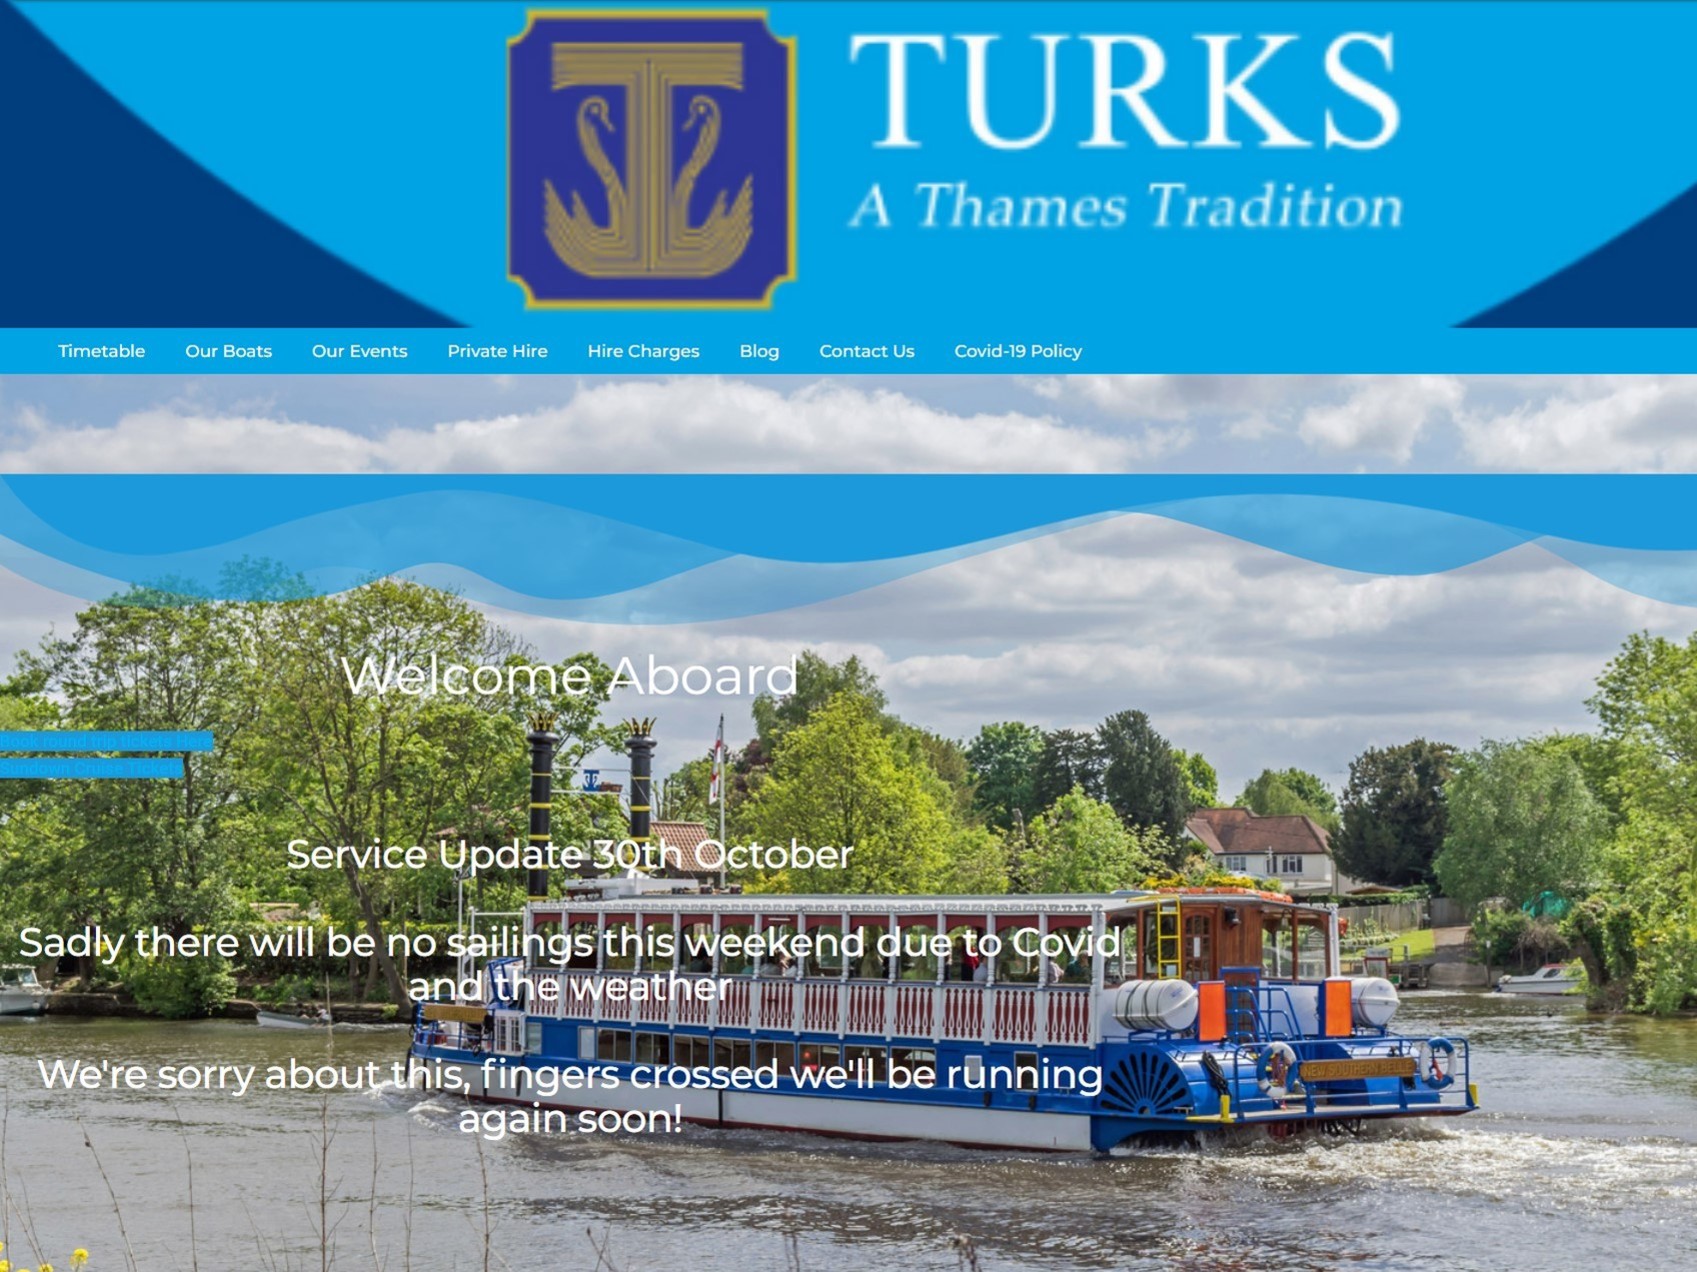 The previous Turks website for private hire boats, displayed on desktop